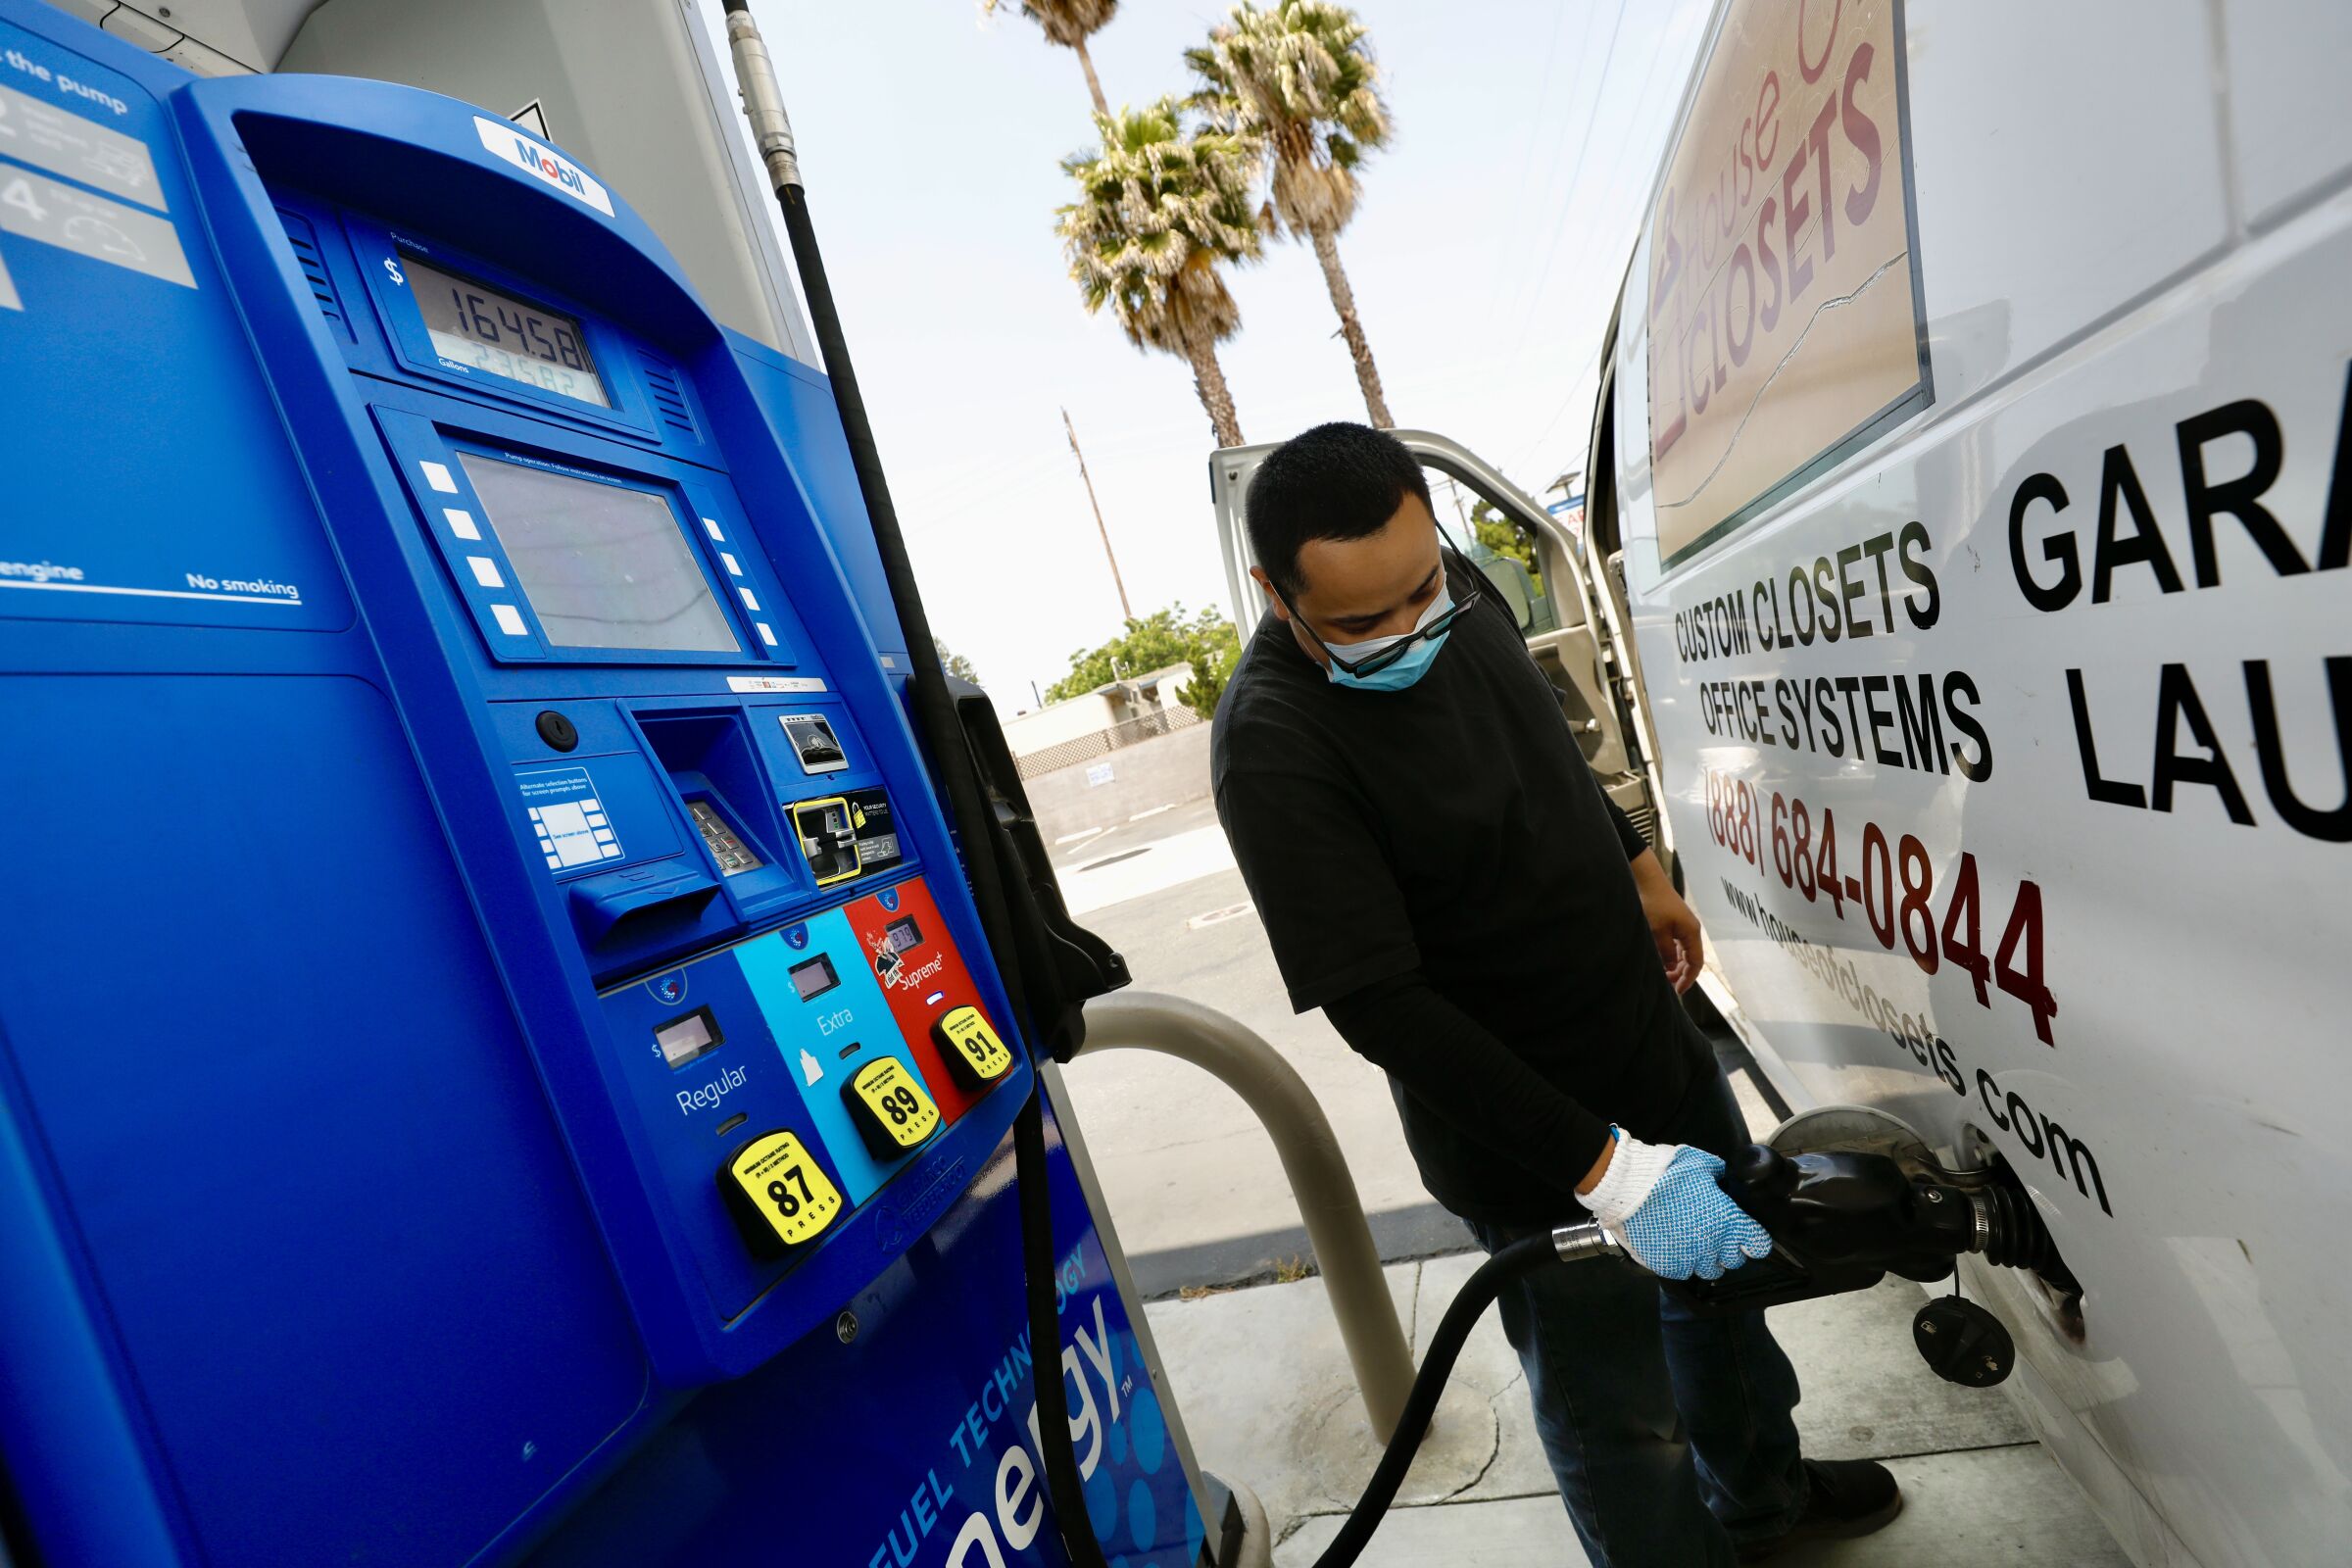 Gas prices in California and across the nation have come down sharply.